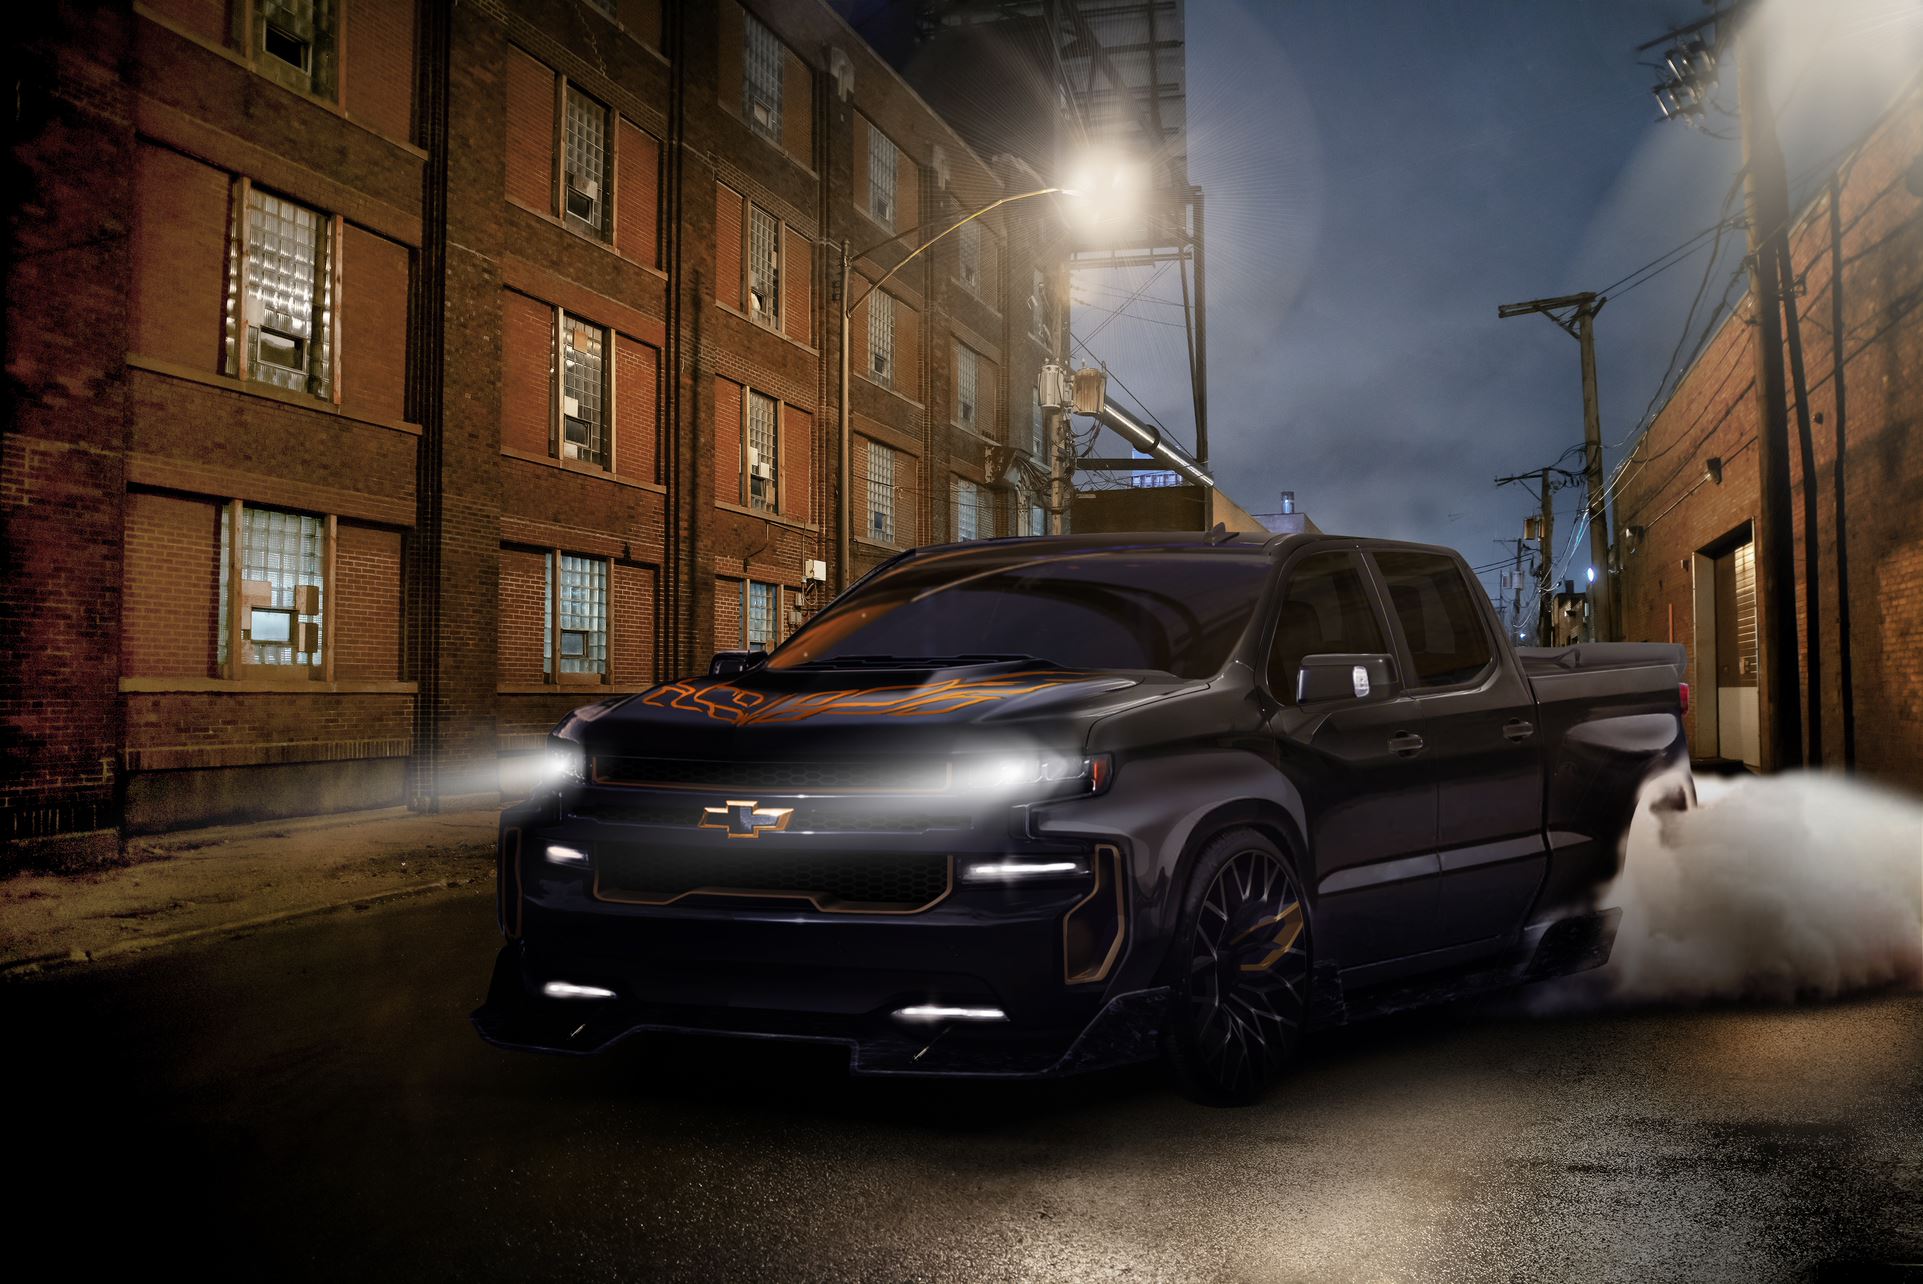 Available as a limited production, The Bandit Truck is an exclusive model brought to market by Legendary Concepts in partnership with Saleen Performance Parts.